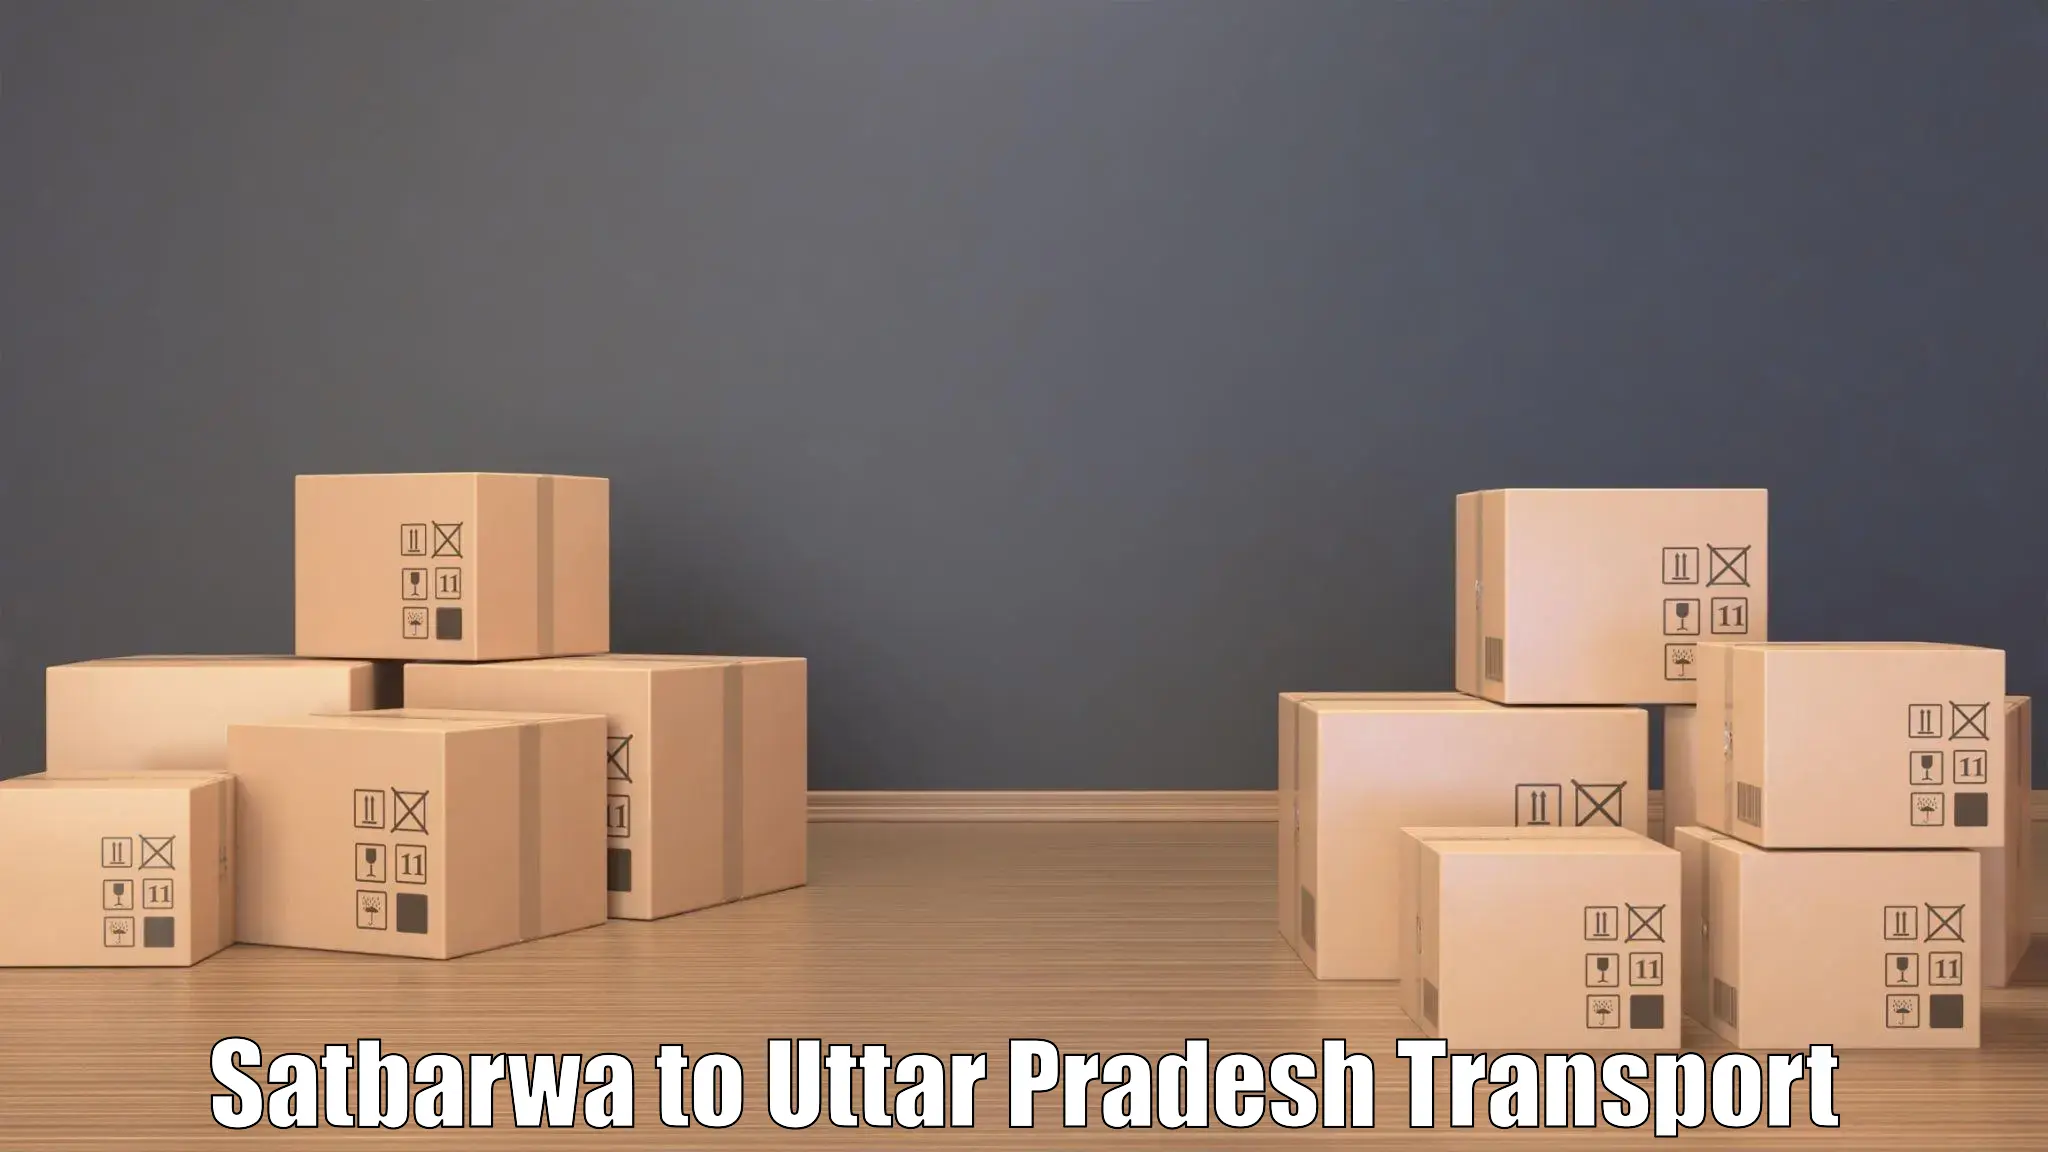 Domestic transport services Satbarwa to Allahabad